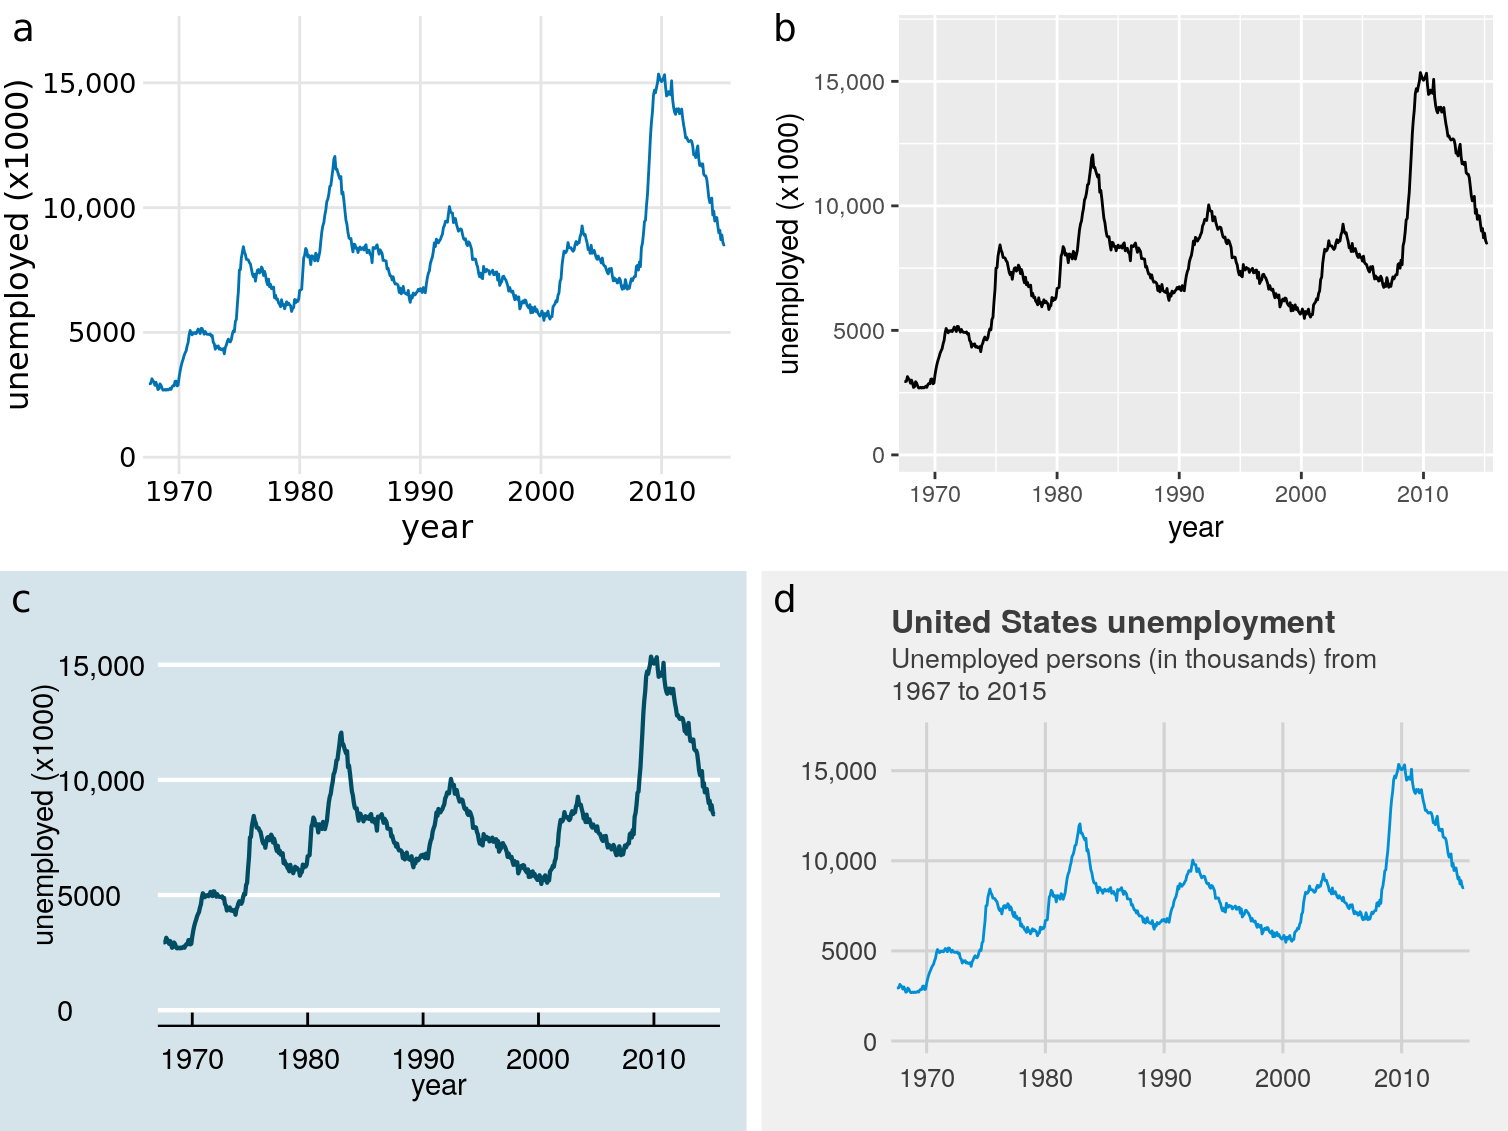 Number of unemployed persons in the U.S. from 1970 to 2015. The same figure is displayed using four different ggplot2 themes: (a) the default theme for this book; (b) the default theme of ggplot2, the plotting software I have used to make all figures in this book; (c) a theme that mimics visualizations shown in the Economist; (d) a theme that mimics visualizations shown by FiveThirtyEight. FiveThirtyEight often forgoes axis labels in favor of plot titles and subtitles, and therefore I have adjusted the figure accordingly. Data source: U.S. Bureau of Labor Statistics